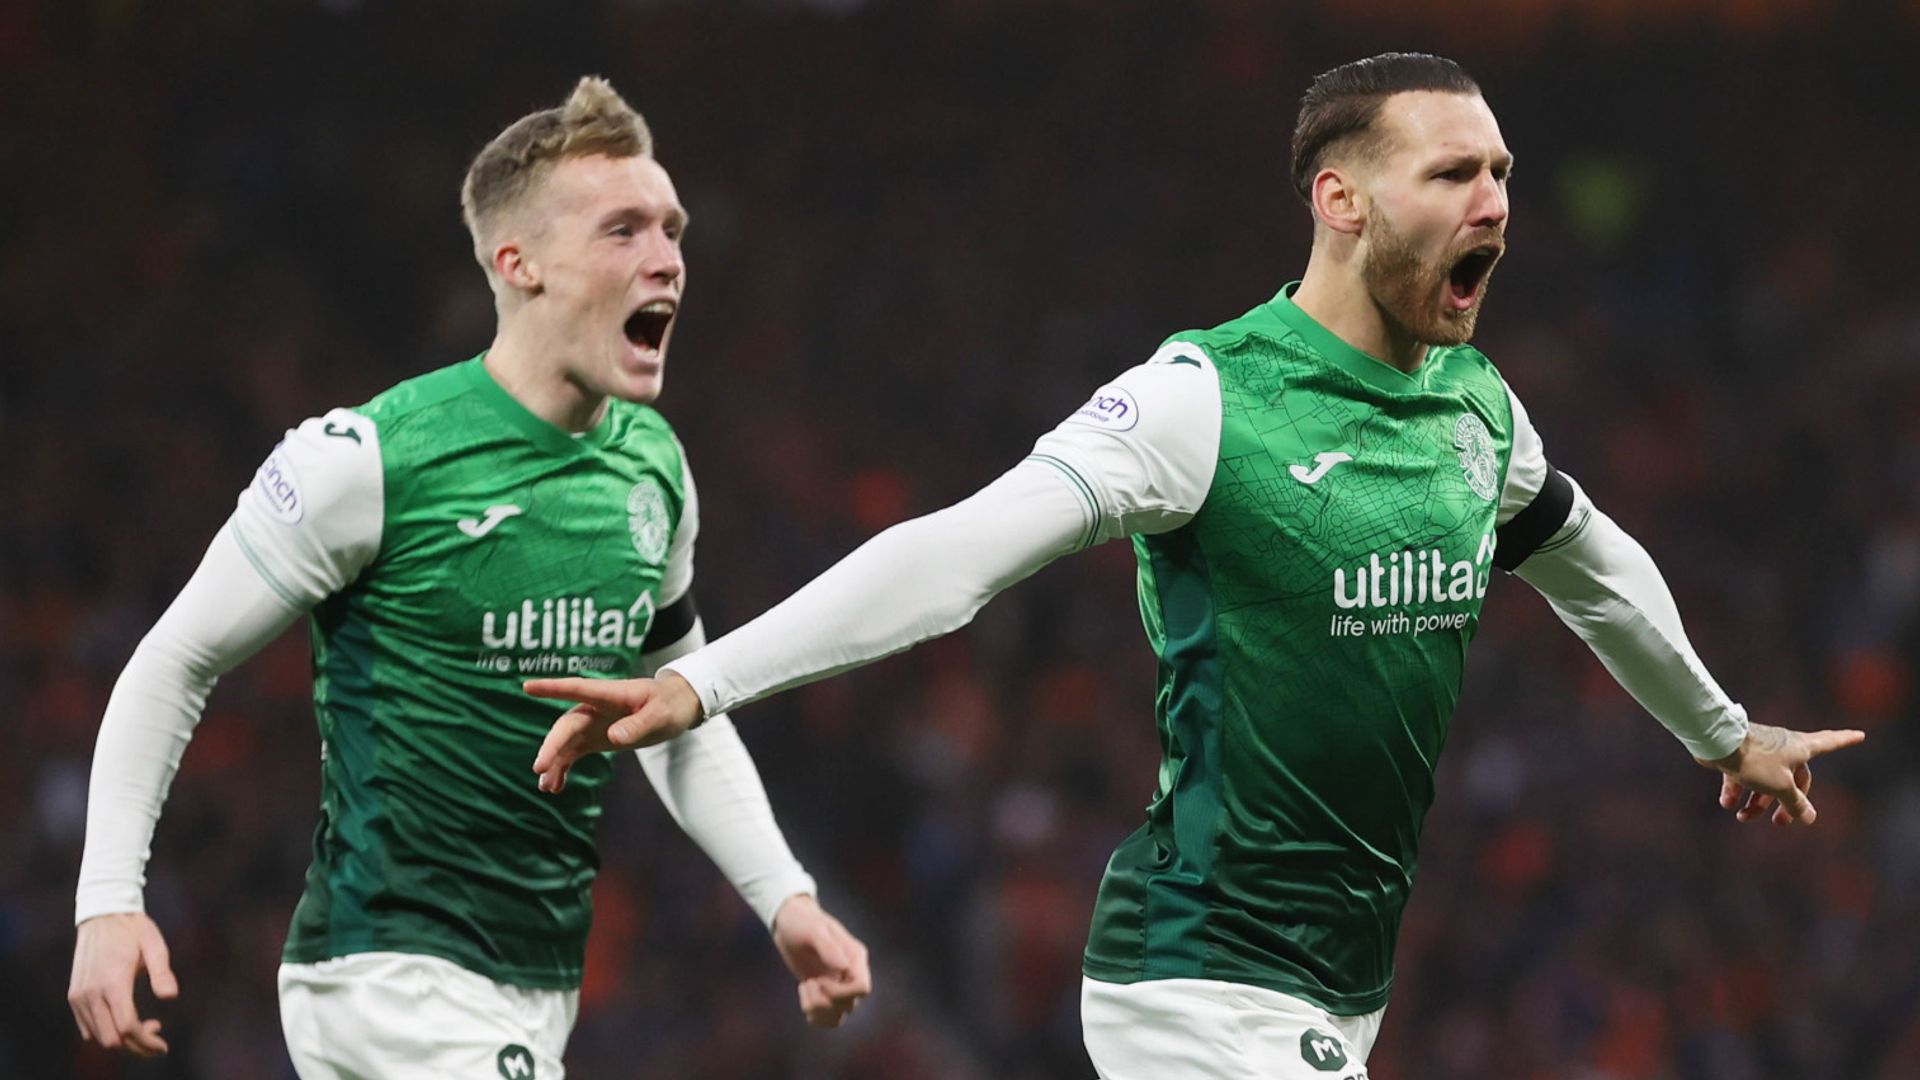 Maloney: Hibs will not sell Boyle on the cheap